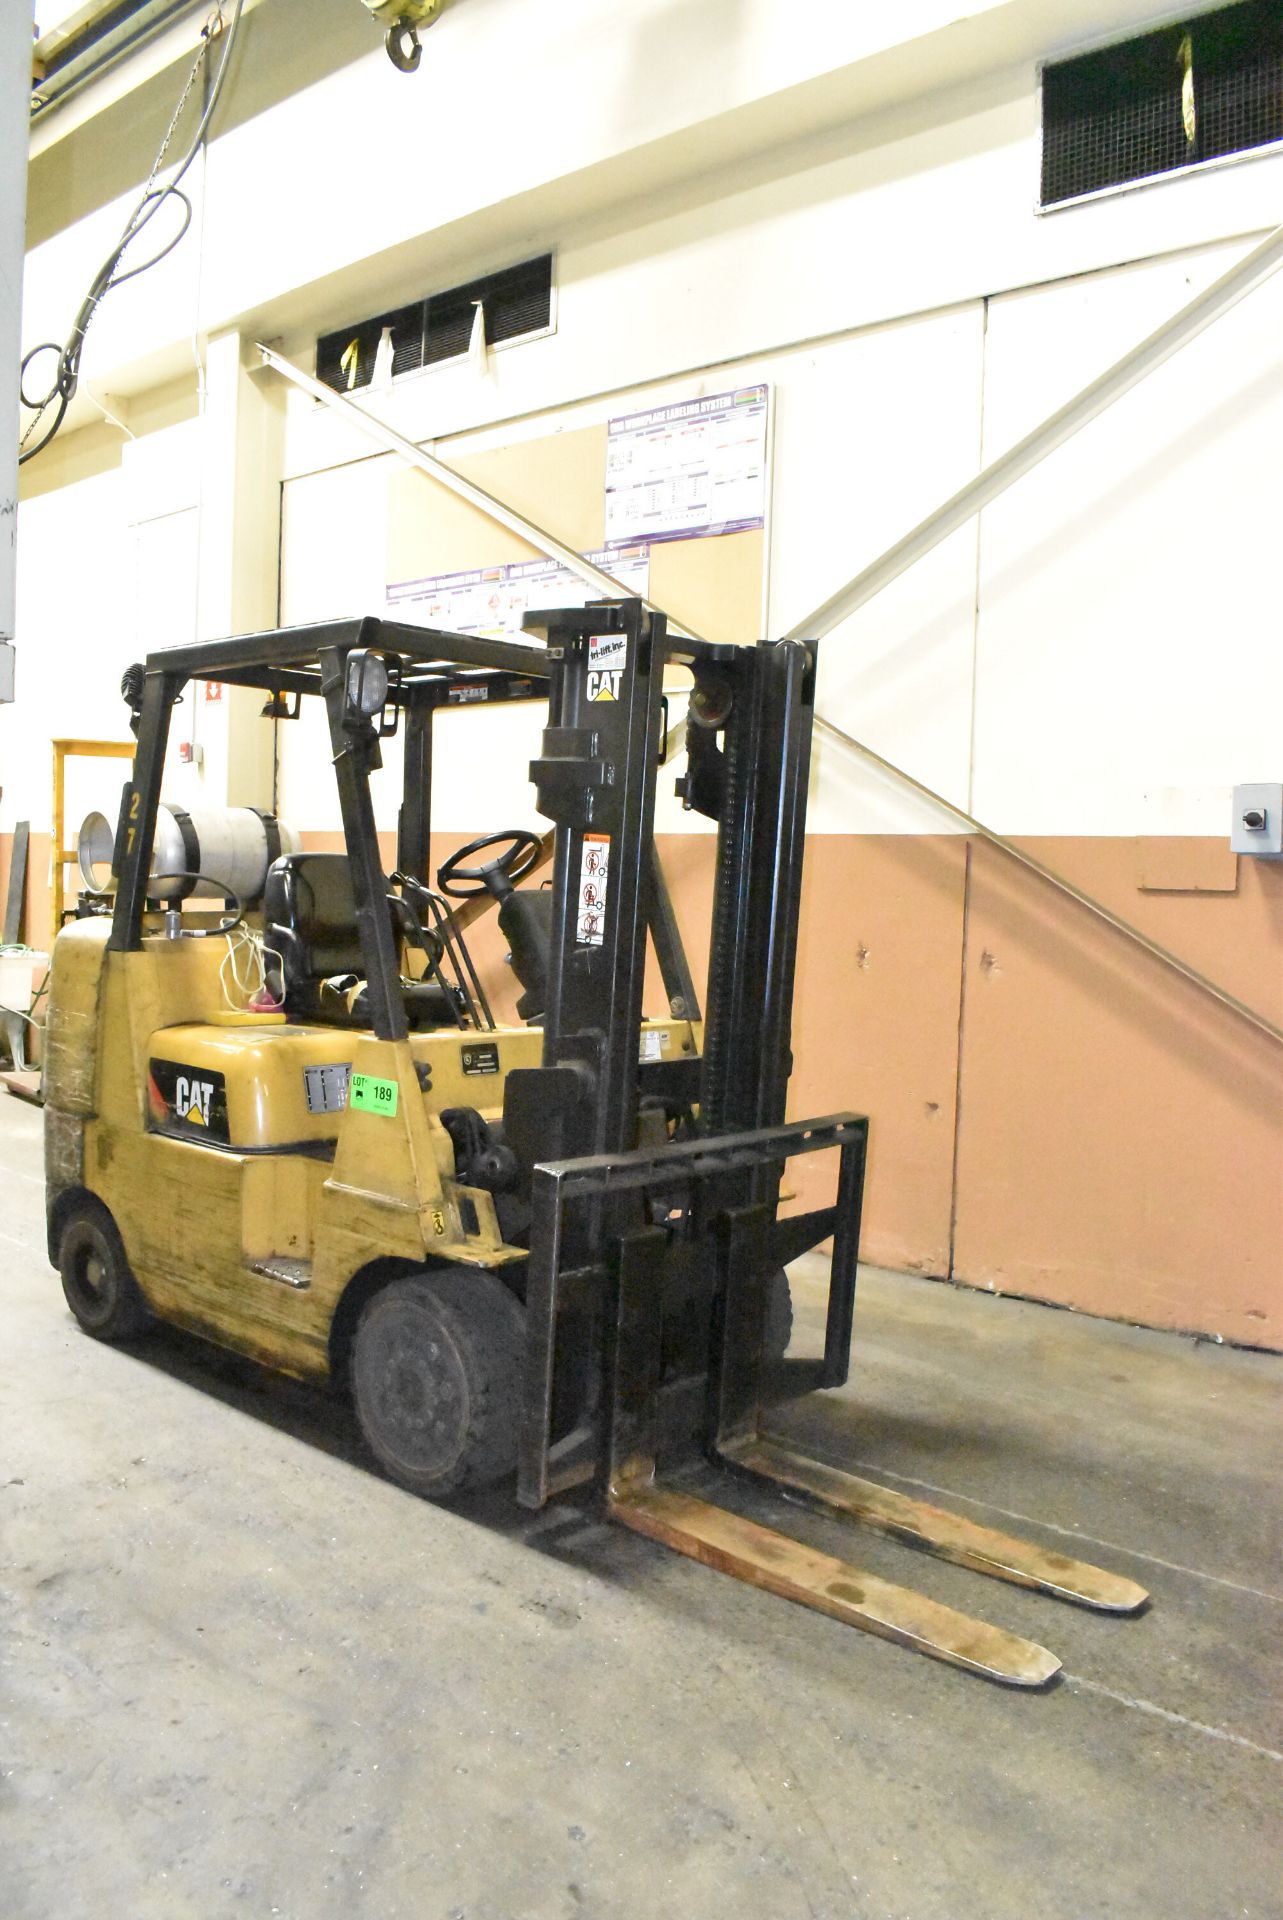 CATERPILLAR GC35K-LP 7,000 LB. LPG FORKLIFT WITH 120" MAX. LIFT HEIGHT, 2-STAGE MAST, SOLID TIRES,